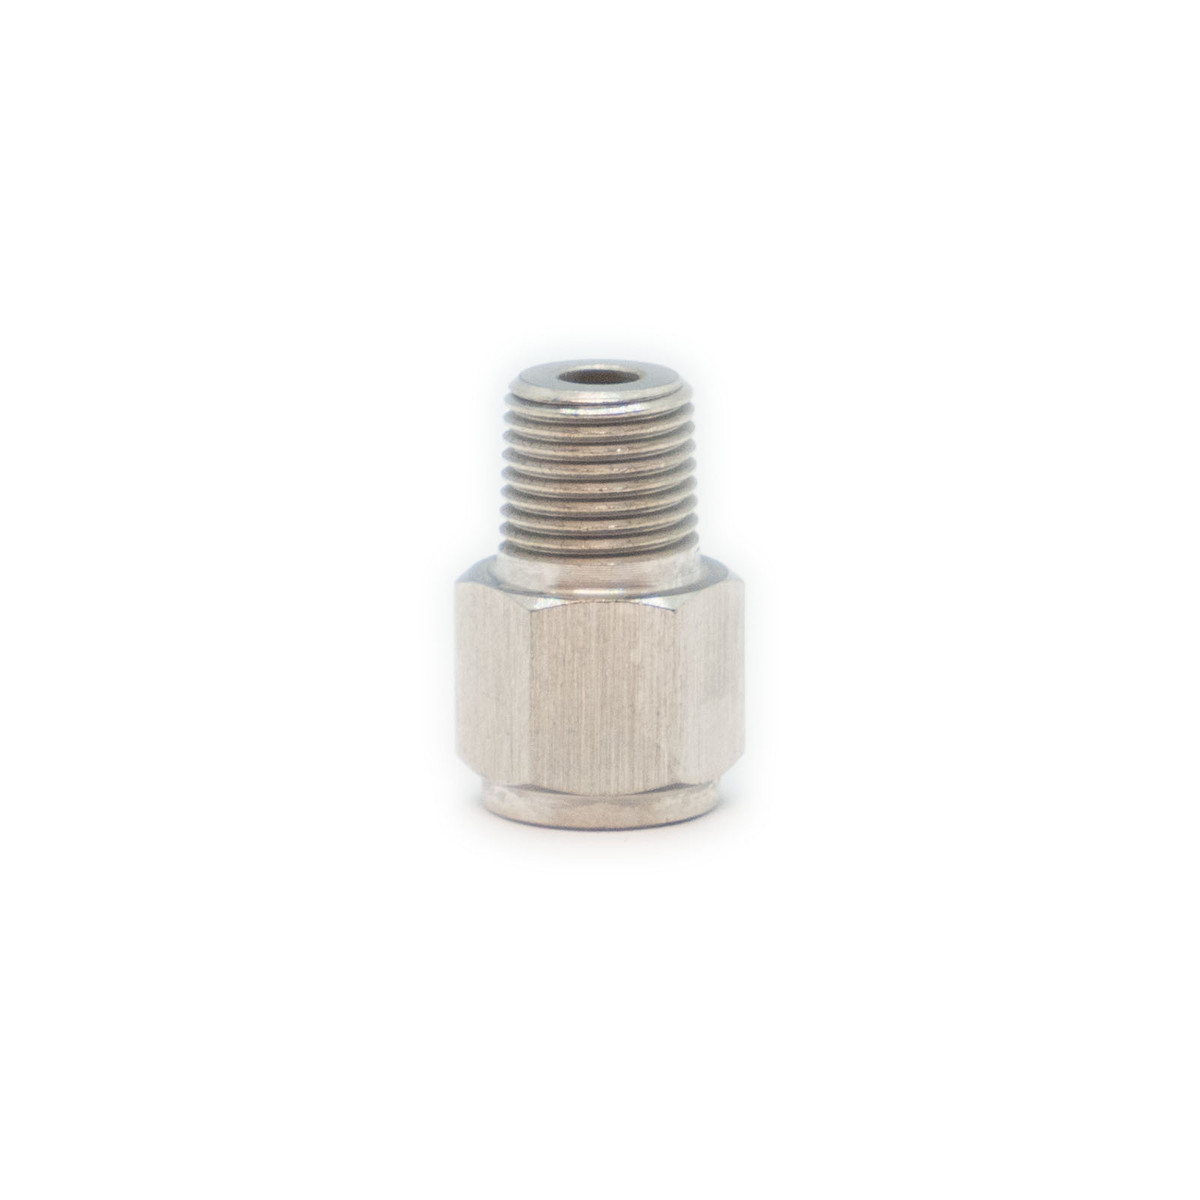 #Adapter M10 x 1 Female to 1-8 NPT Male